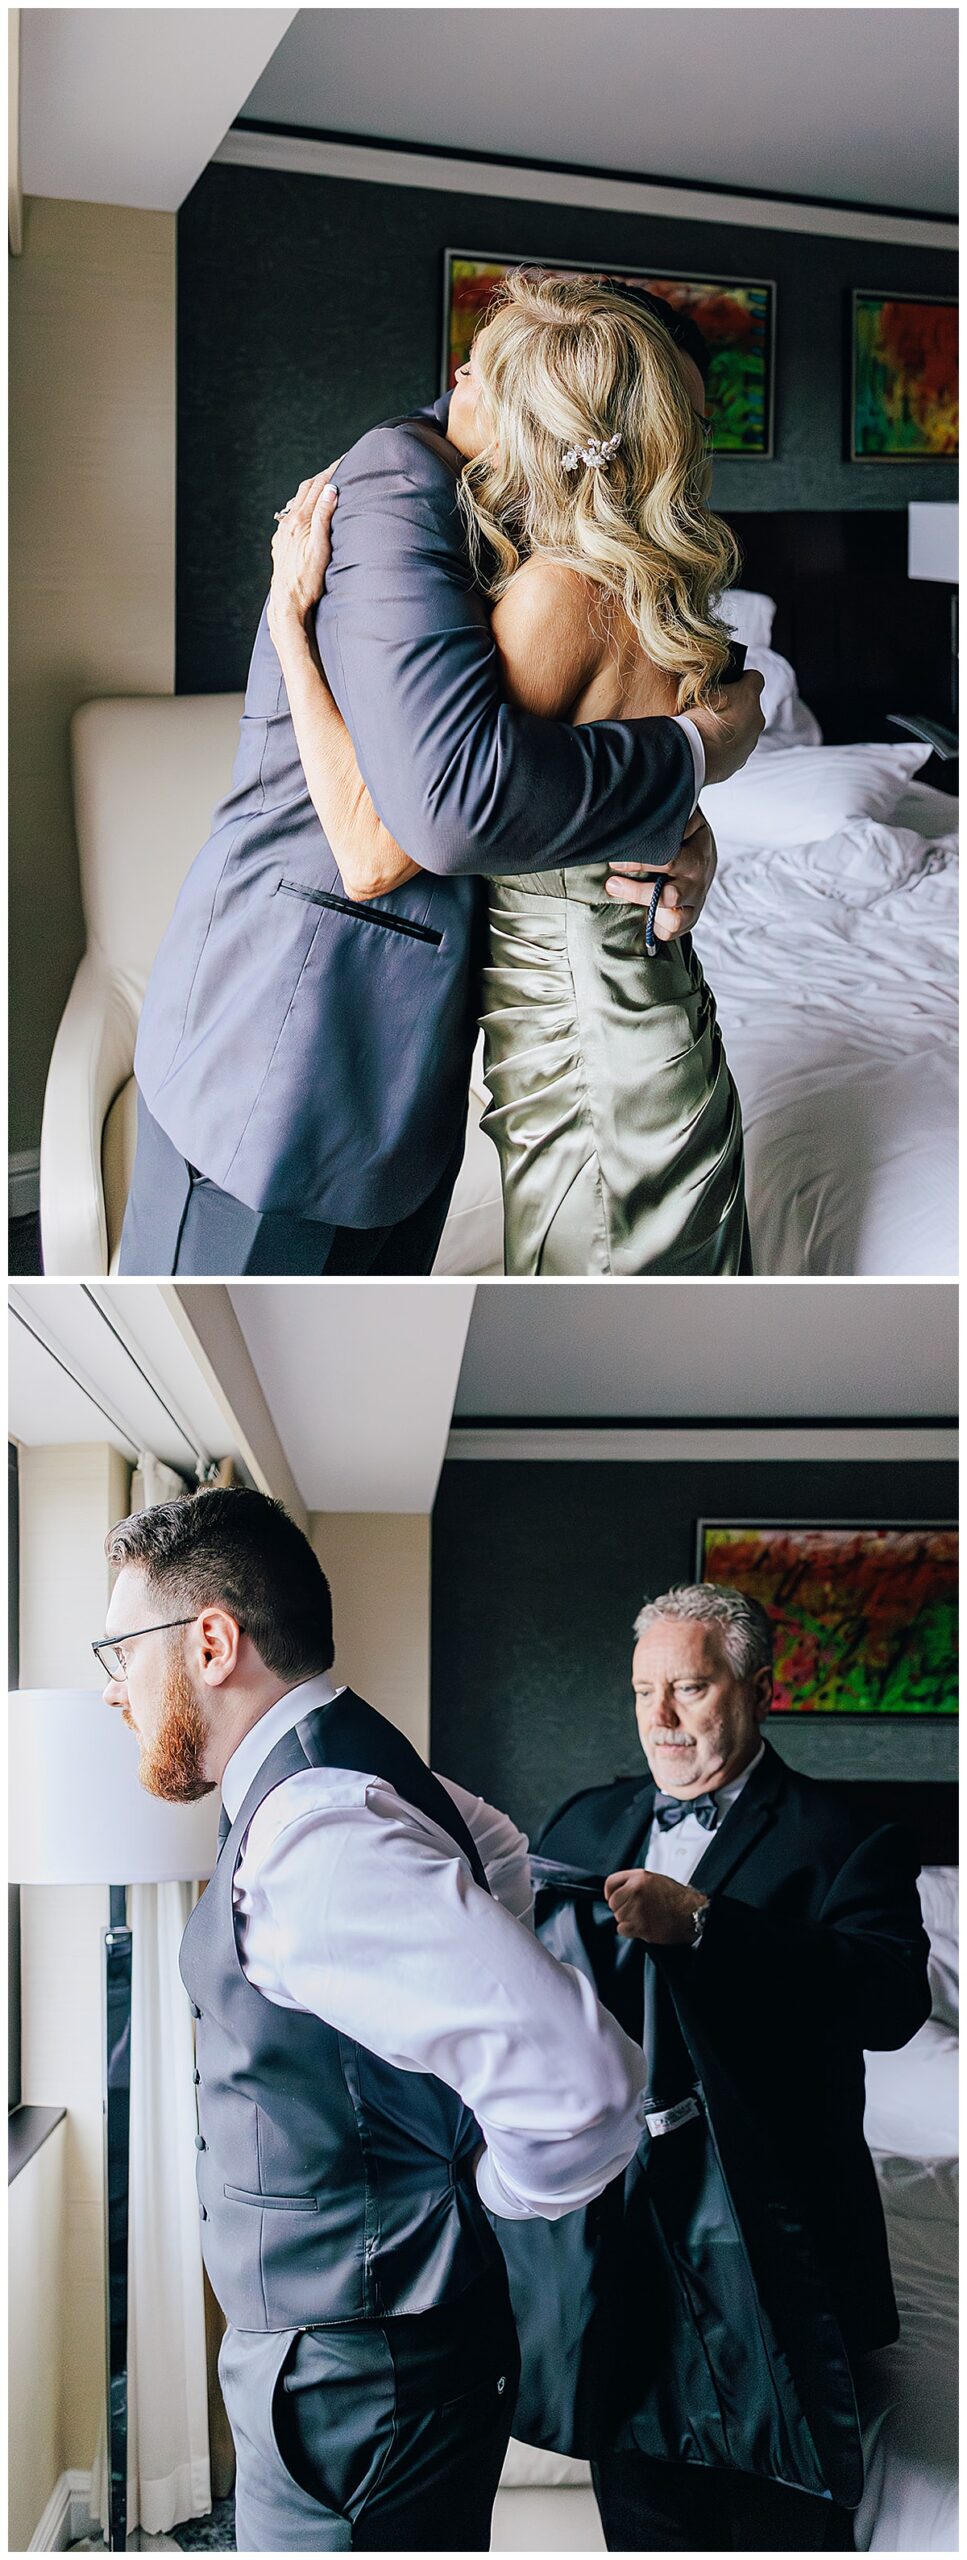 Parents get groom ready for wedding day at Kayla Bouren Photography